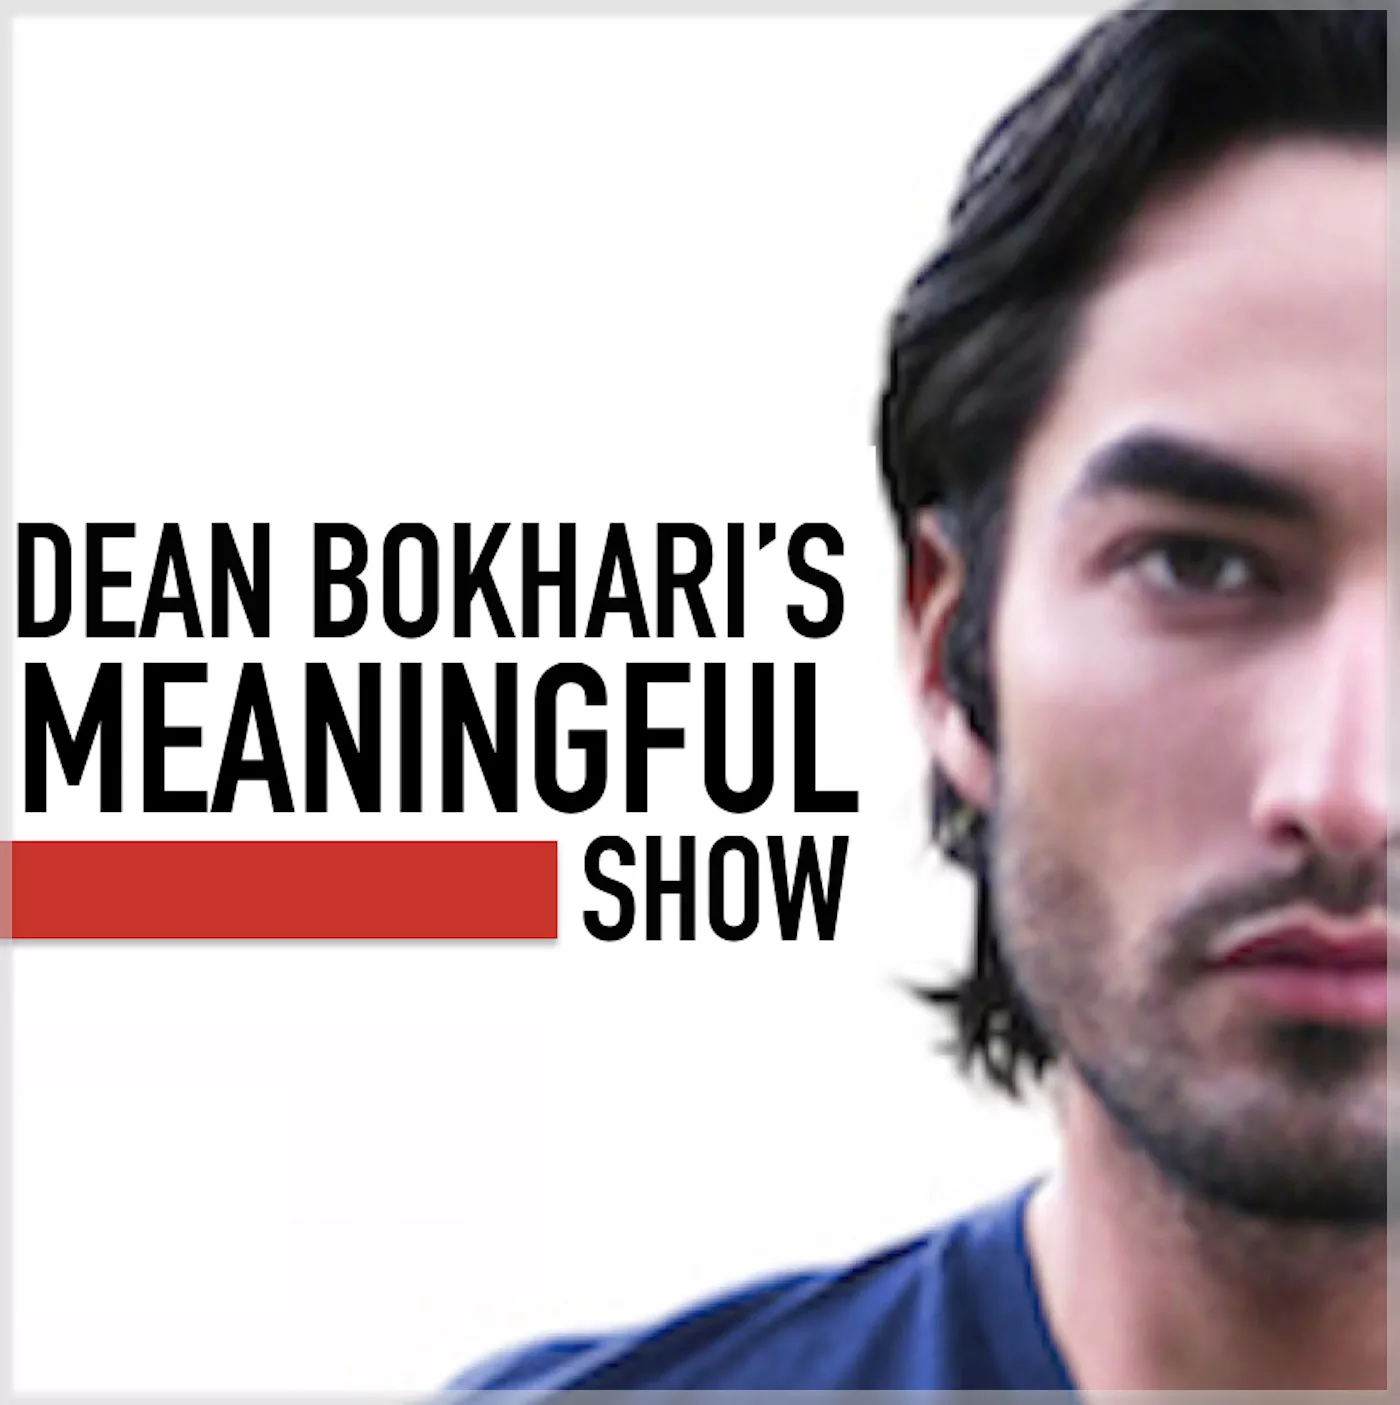 Subscribe to the Meaningful Show With Dean Bokhari on iTunes